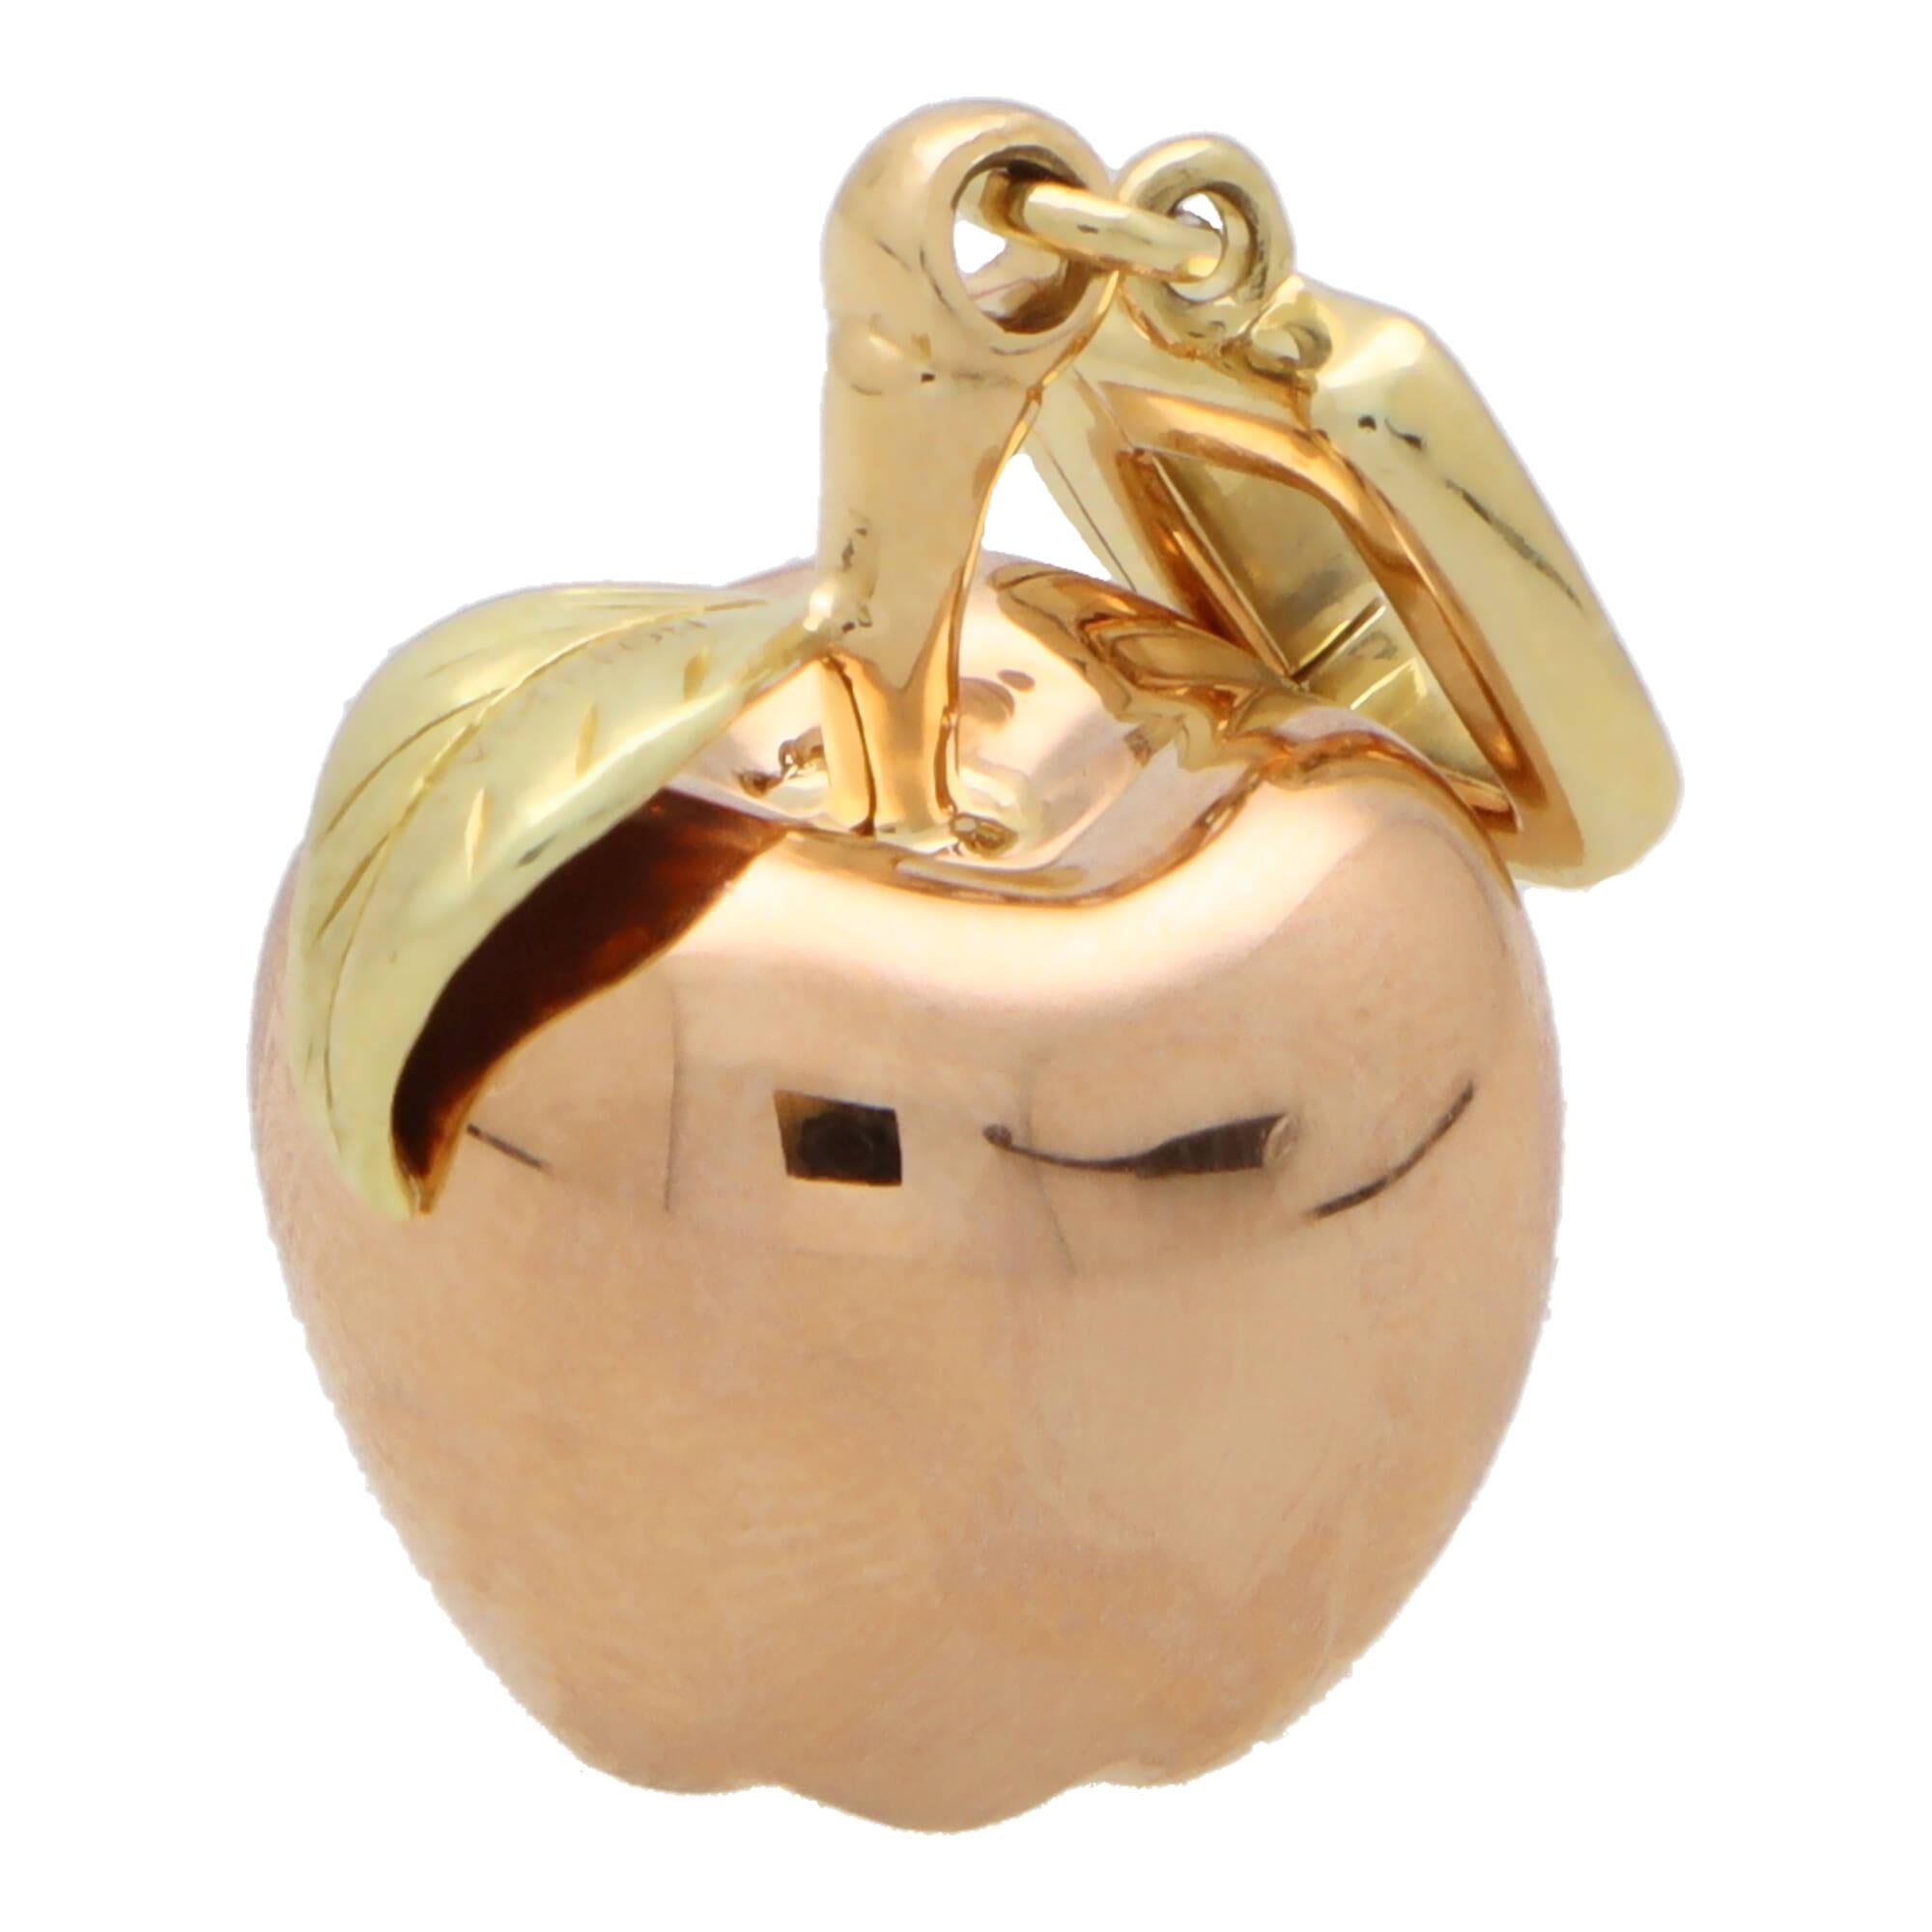 A beautiful vintage Louis Vuitton golden apple charm in 18k rose and yellow gold.

The charm is formed in an apple motif with the main body being made of 18k polished rose gold. The apple is accented with a carved yellow gold leaf where the brands